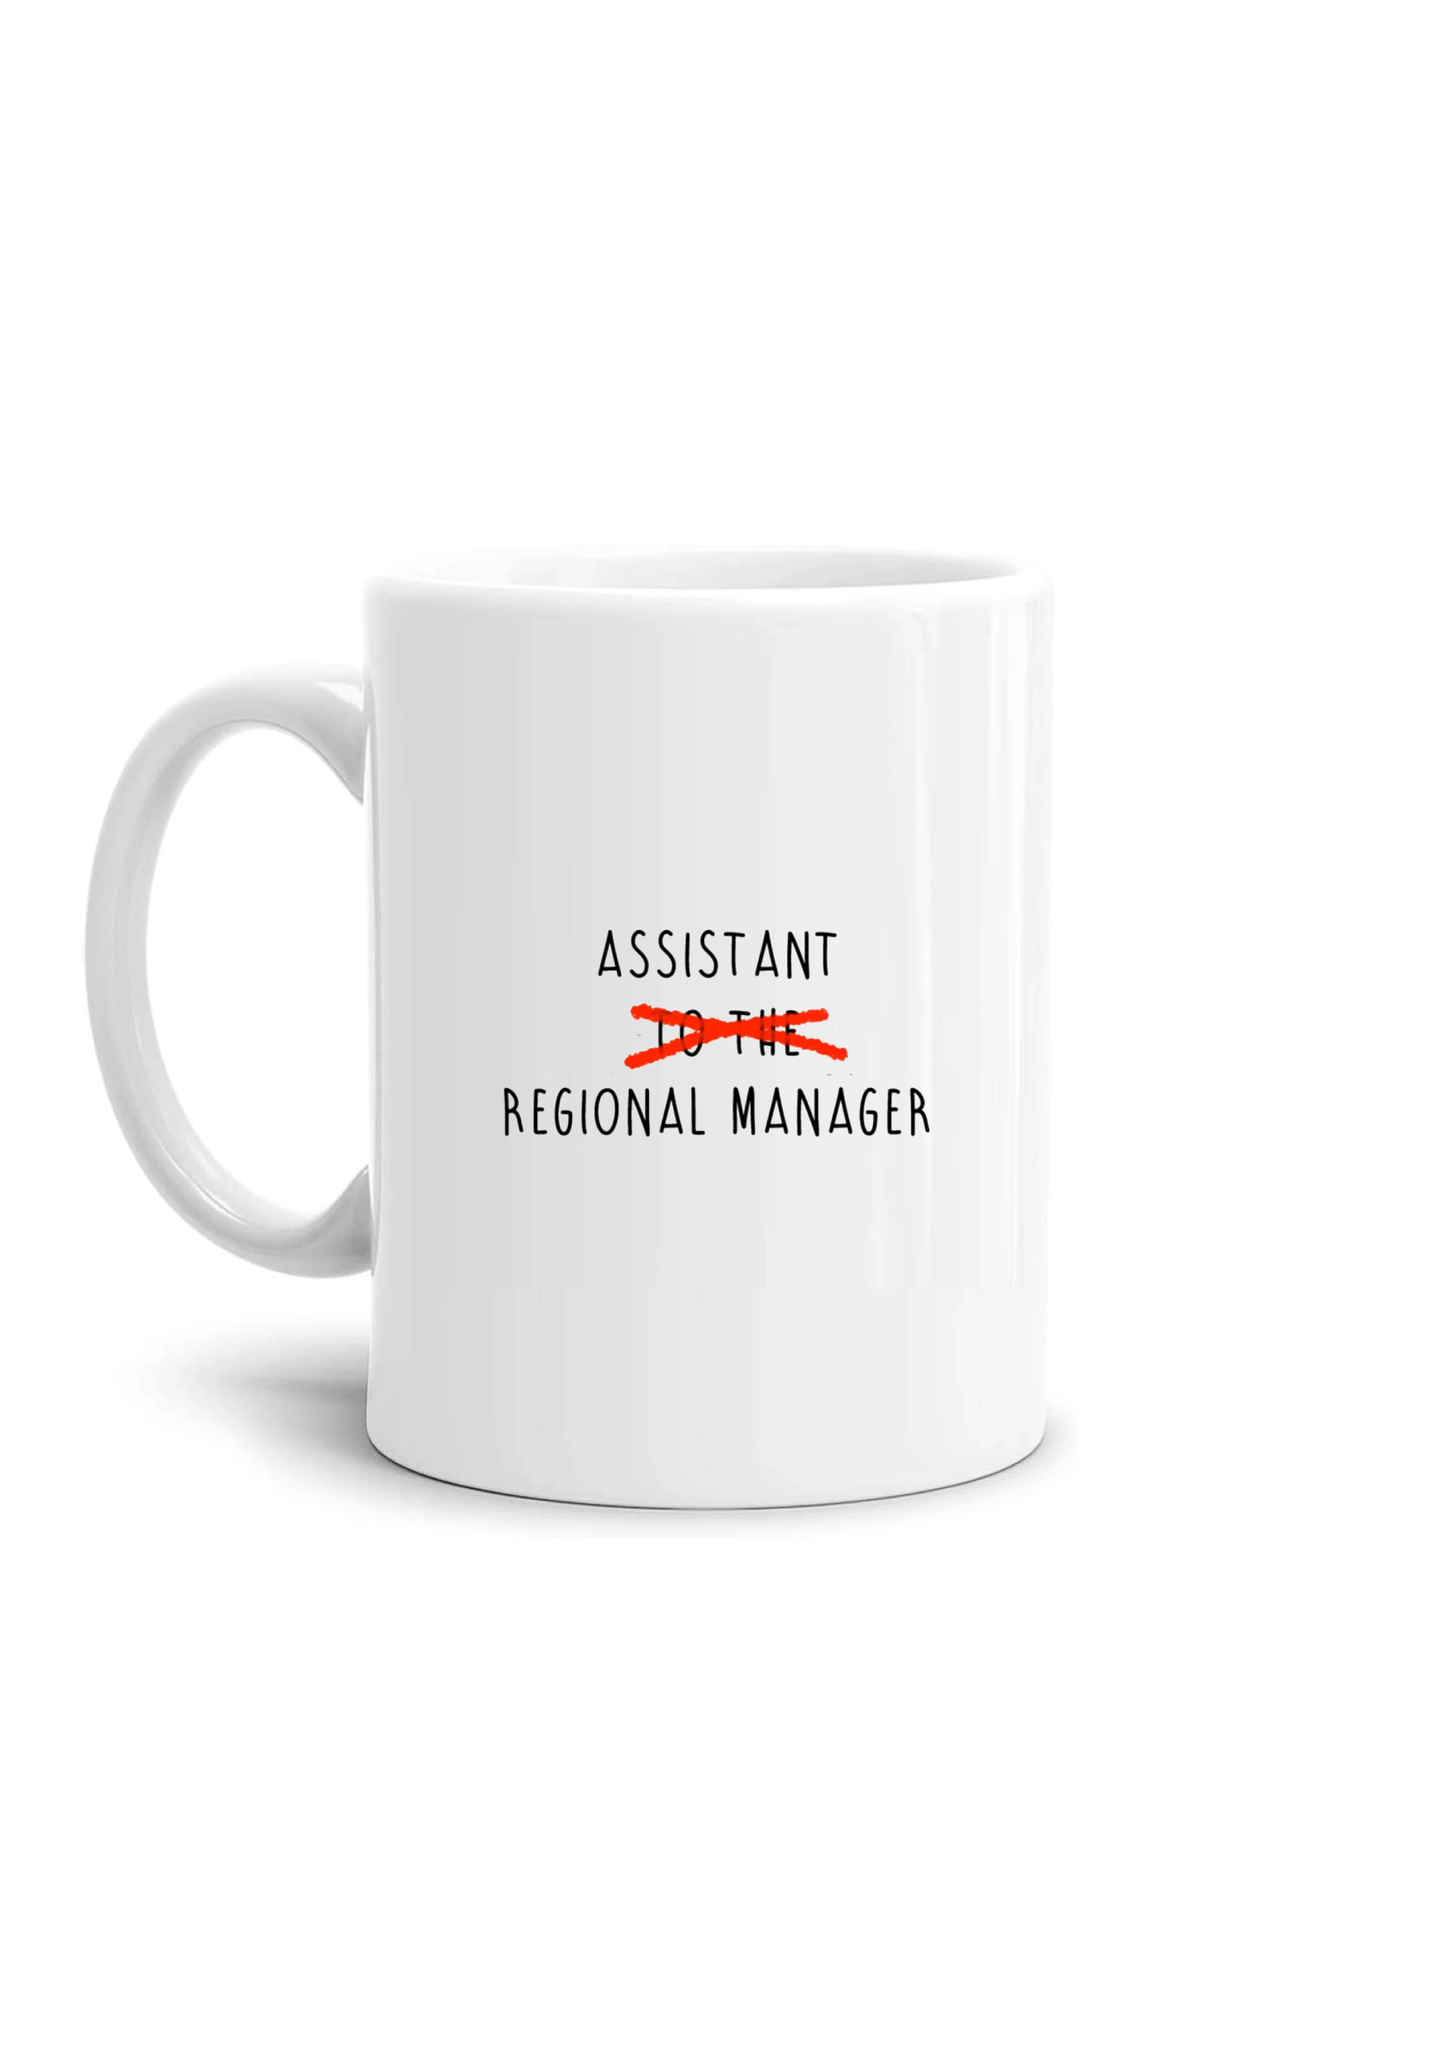 tazza Mug-assistant regional manager office Dwight Schrute